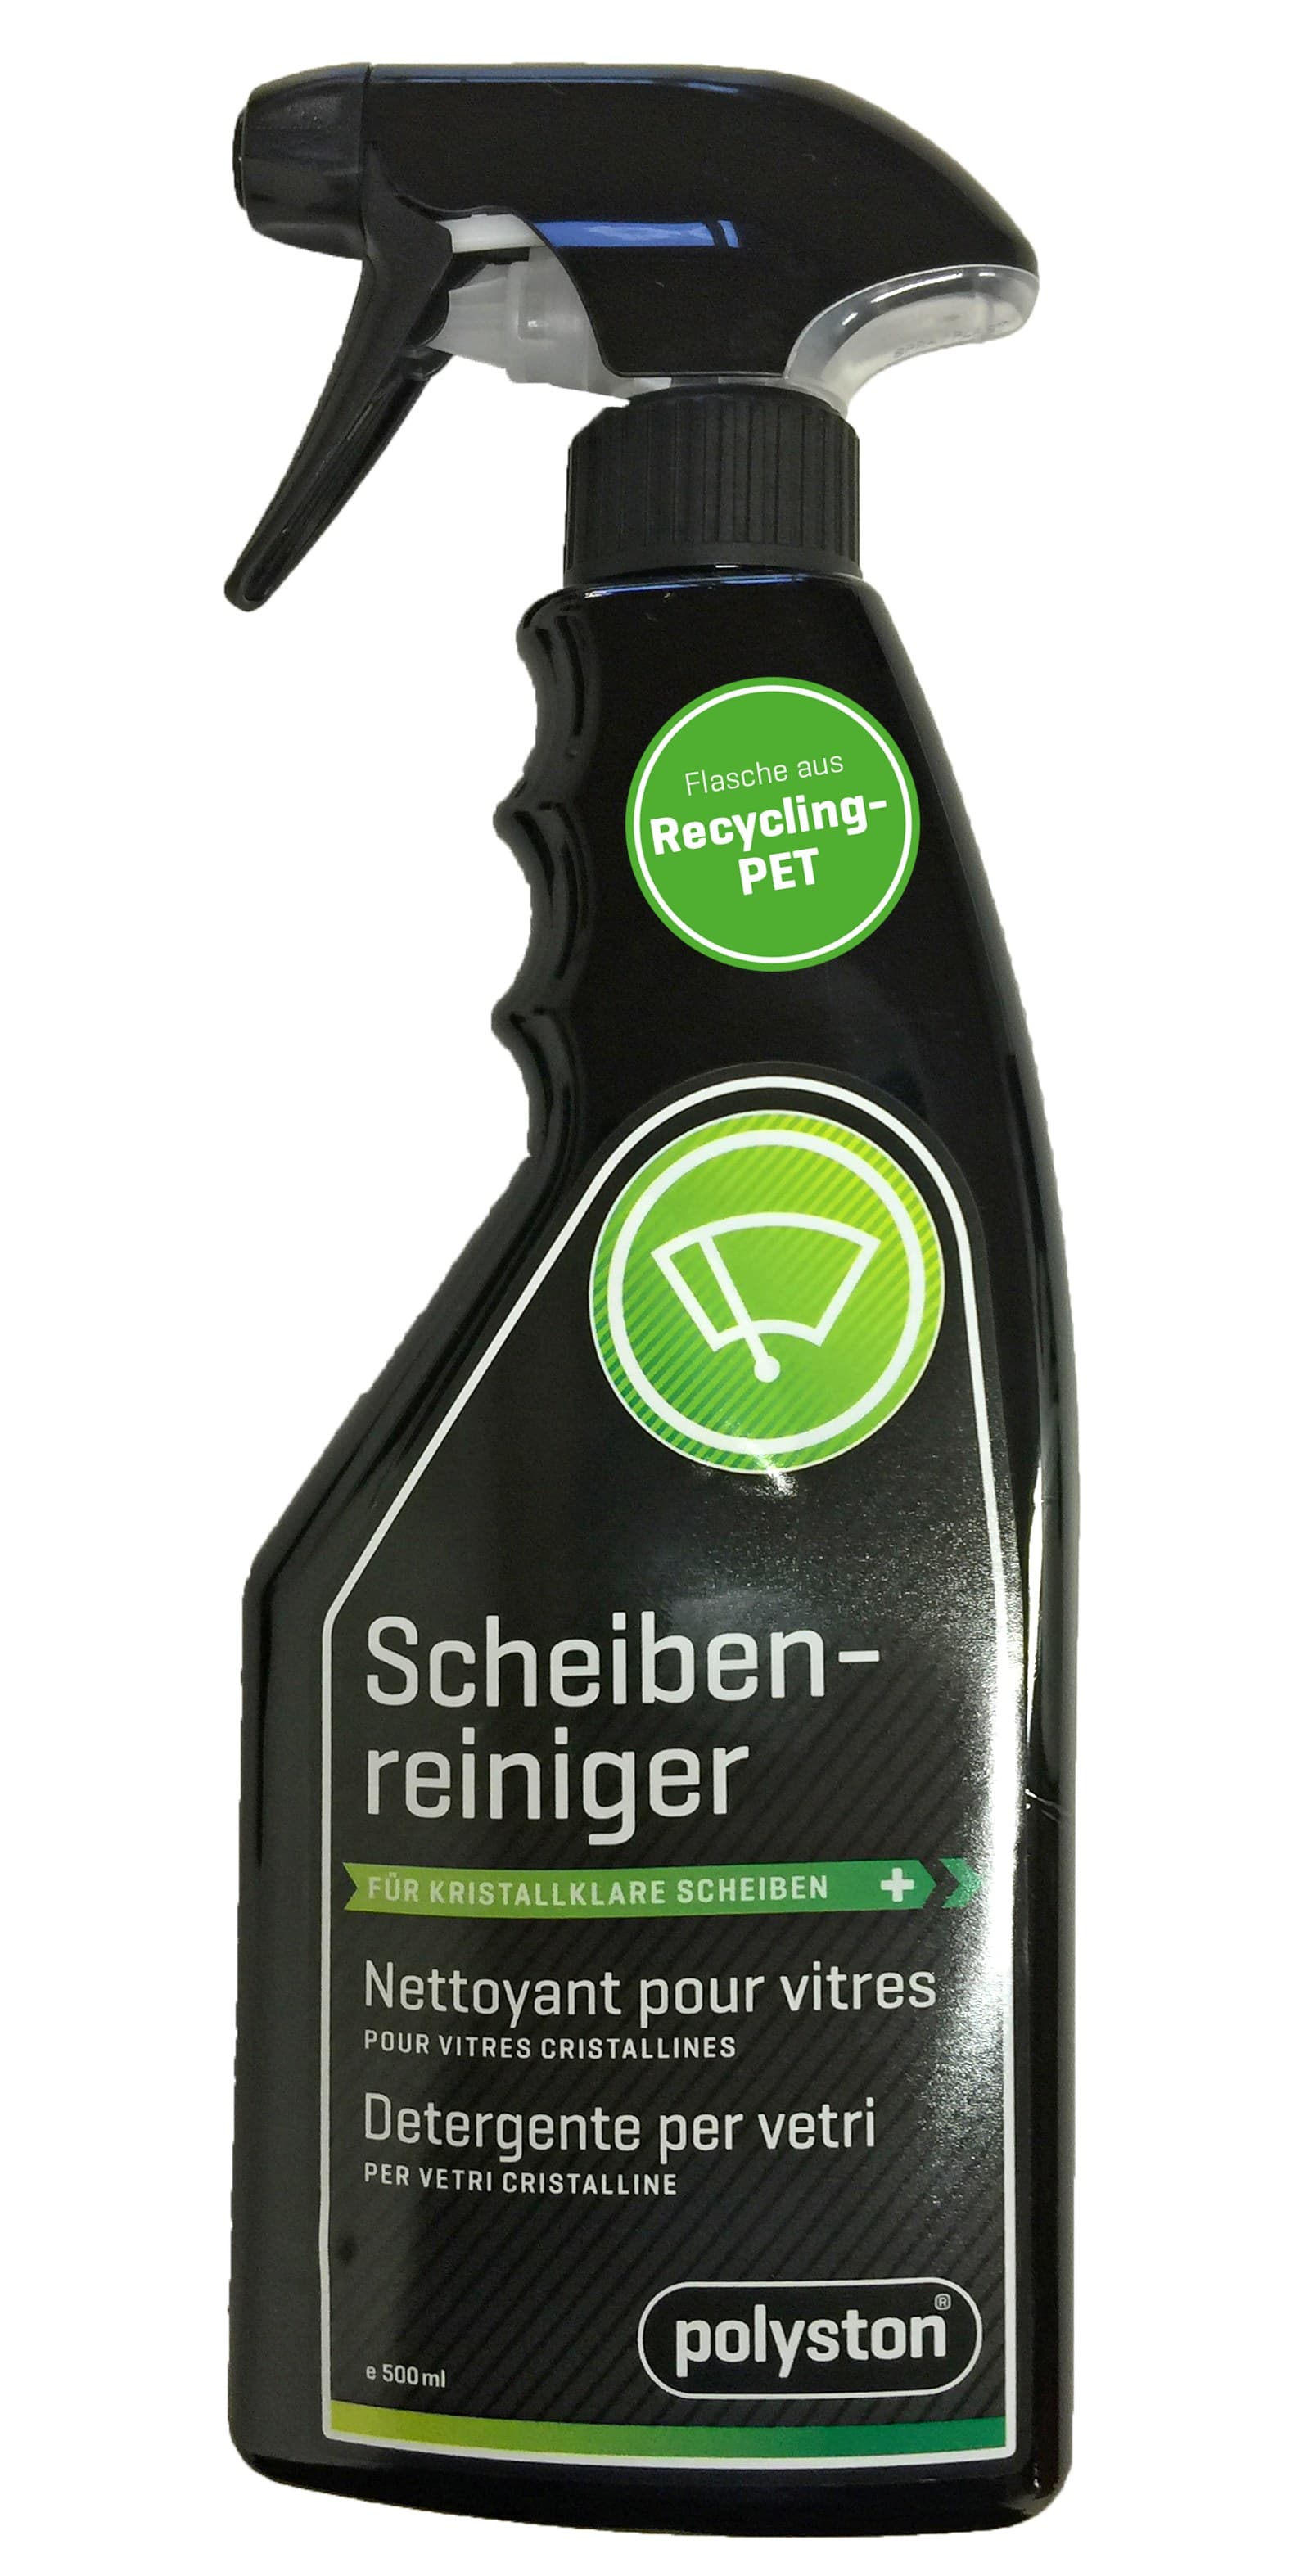 Trigger bottles made out of 100% recycled PET